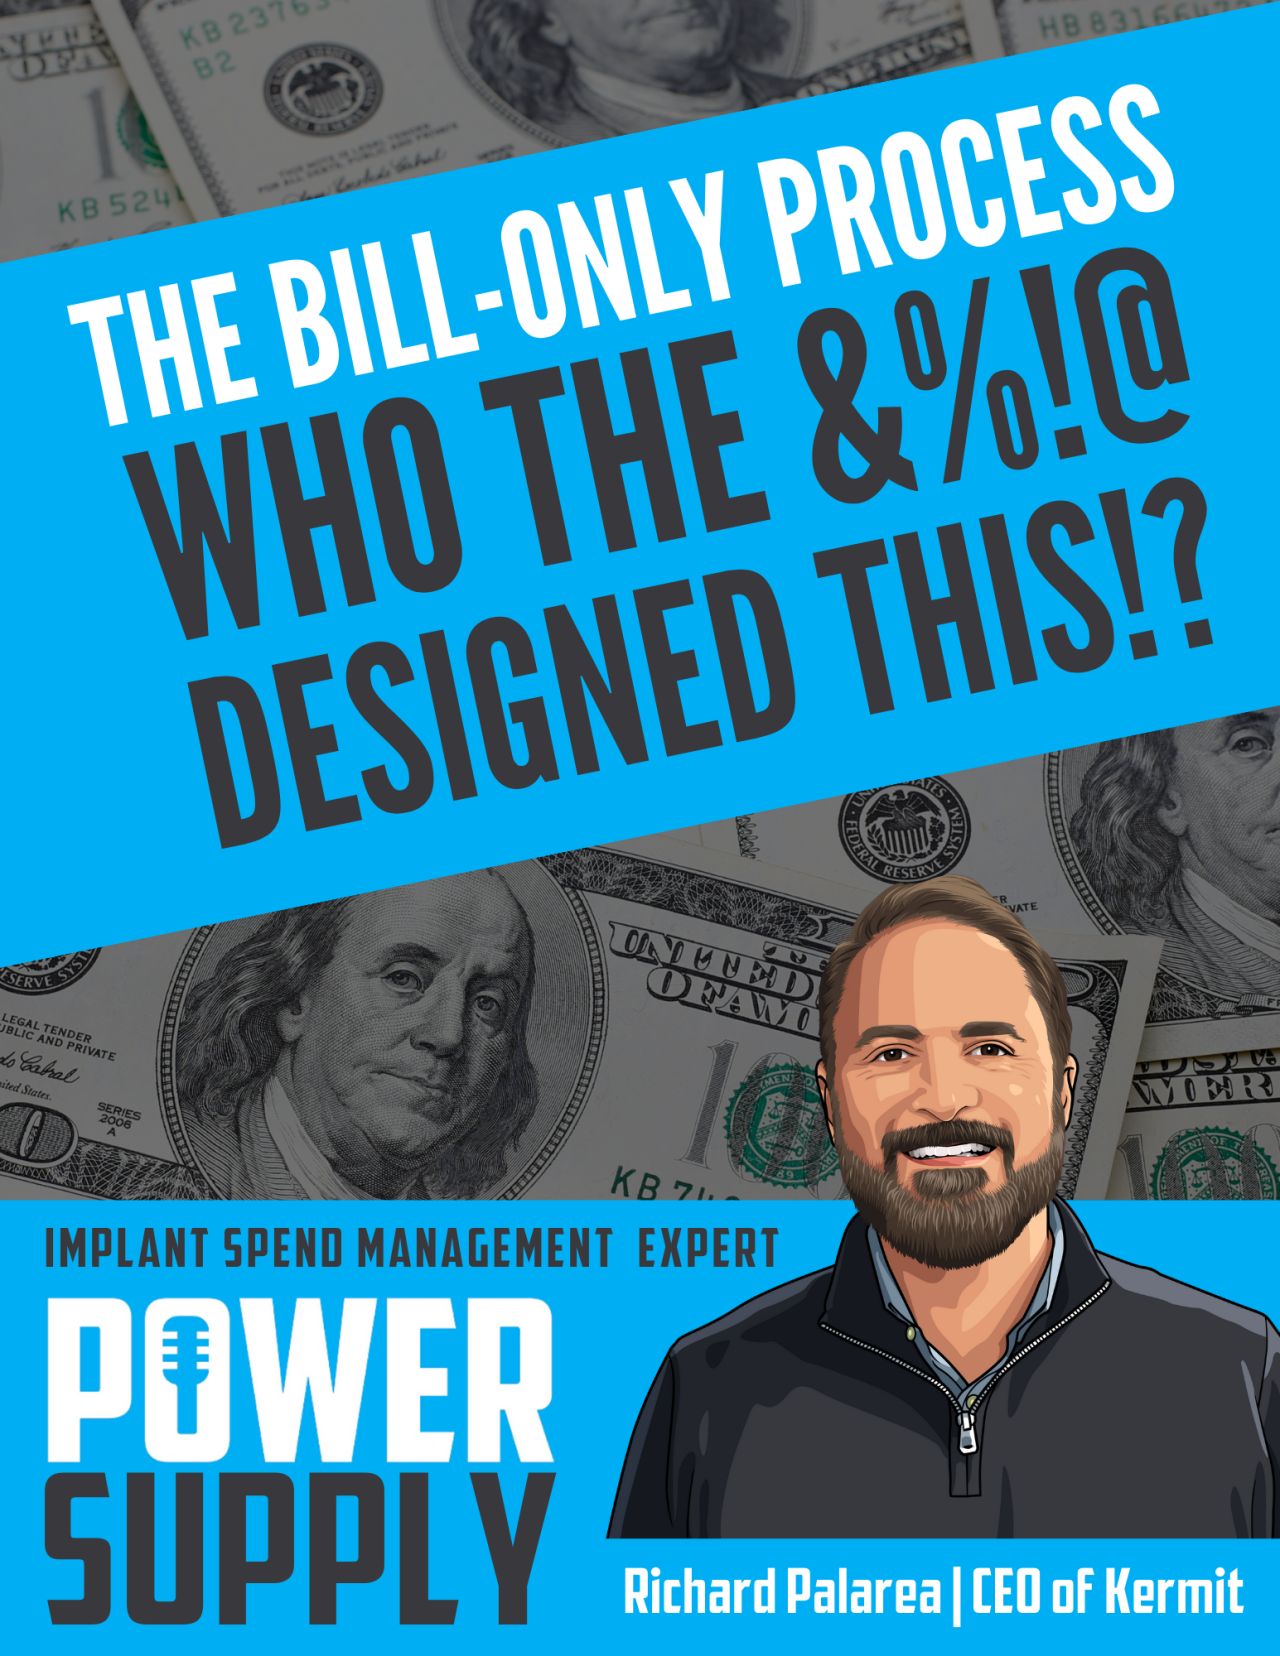 Power Supply Expert Series - Part 3 - The Bill-Only Process: Who the &%!@ Designed This!?